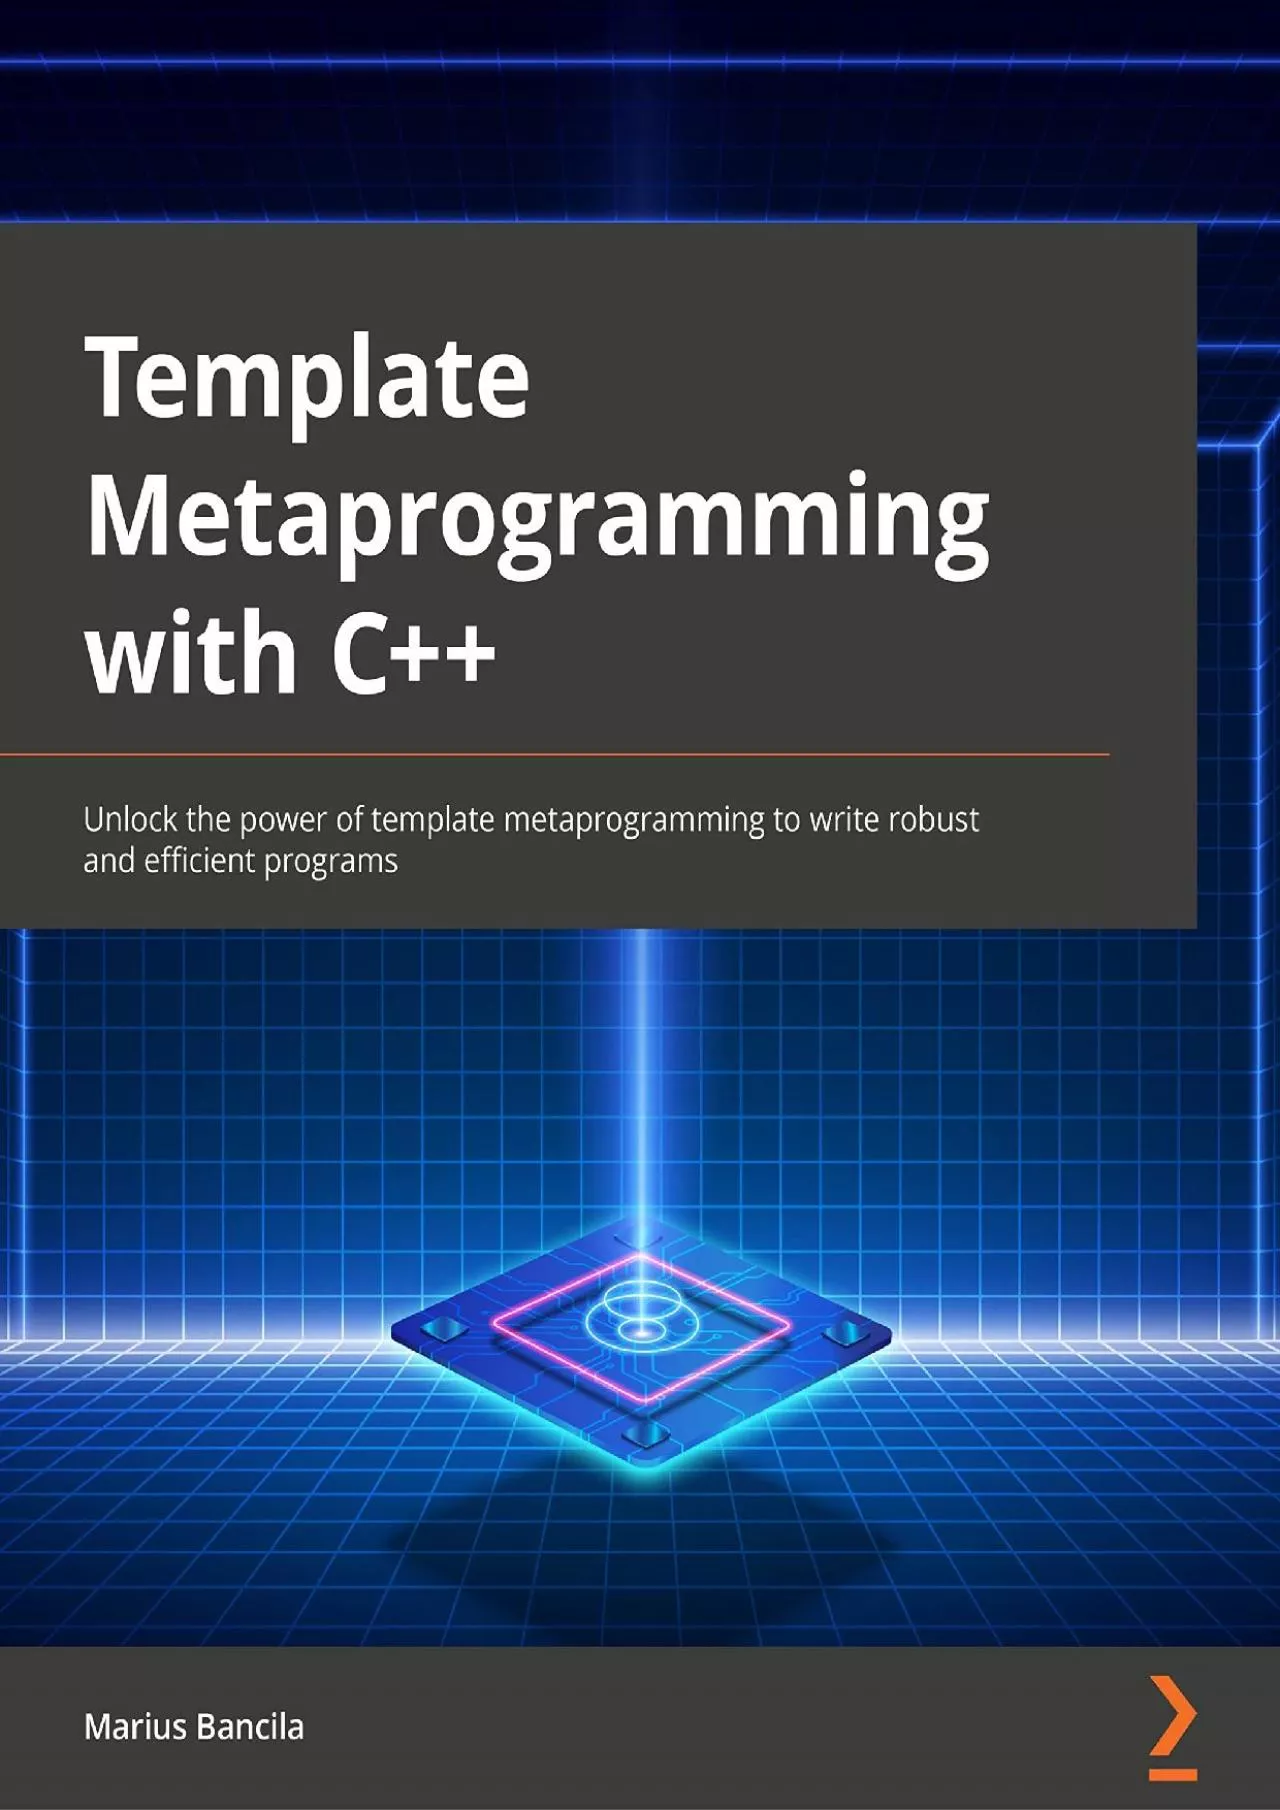 [BEST]-Template Metaprogramming with C++: Learn everything about C++ templates and unlock